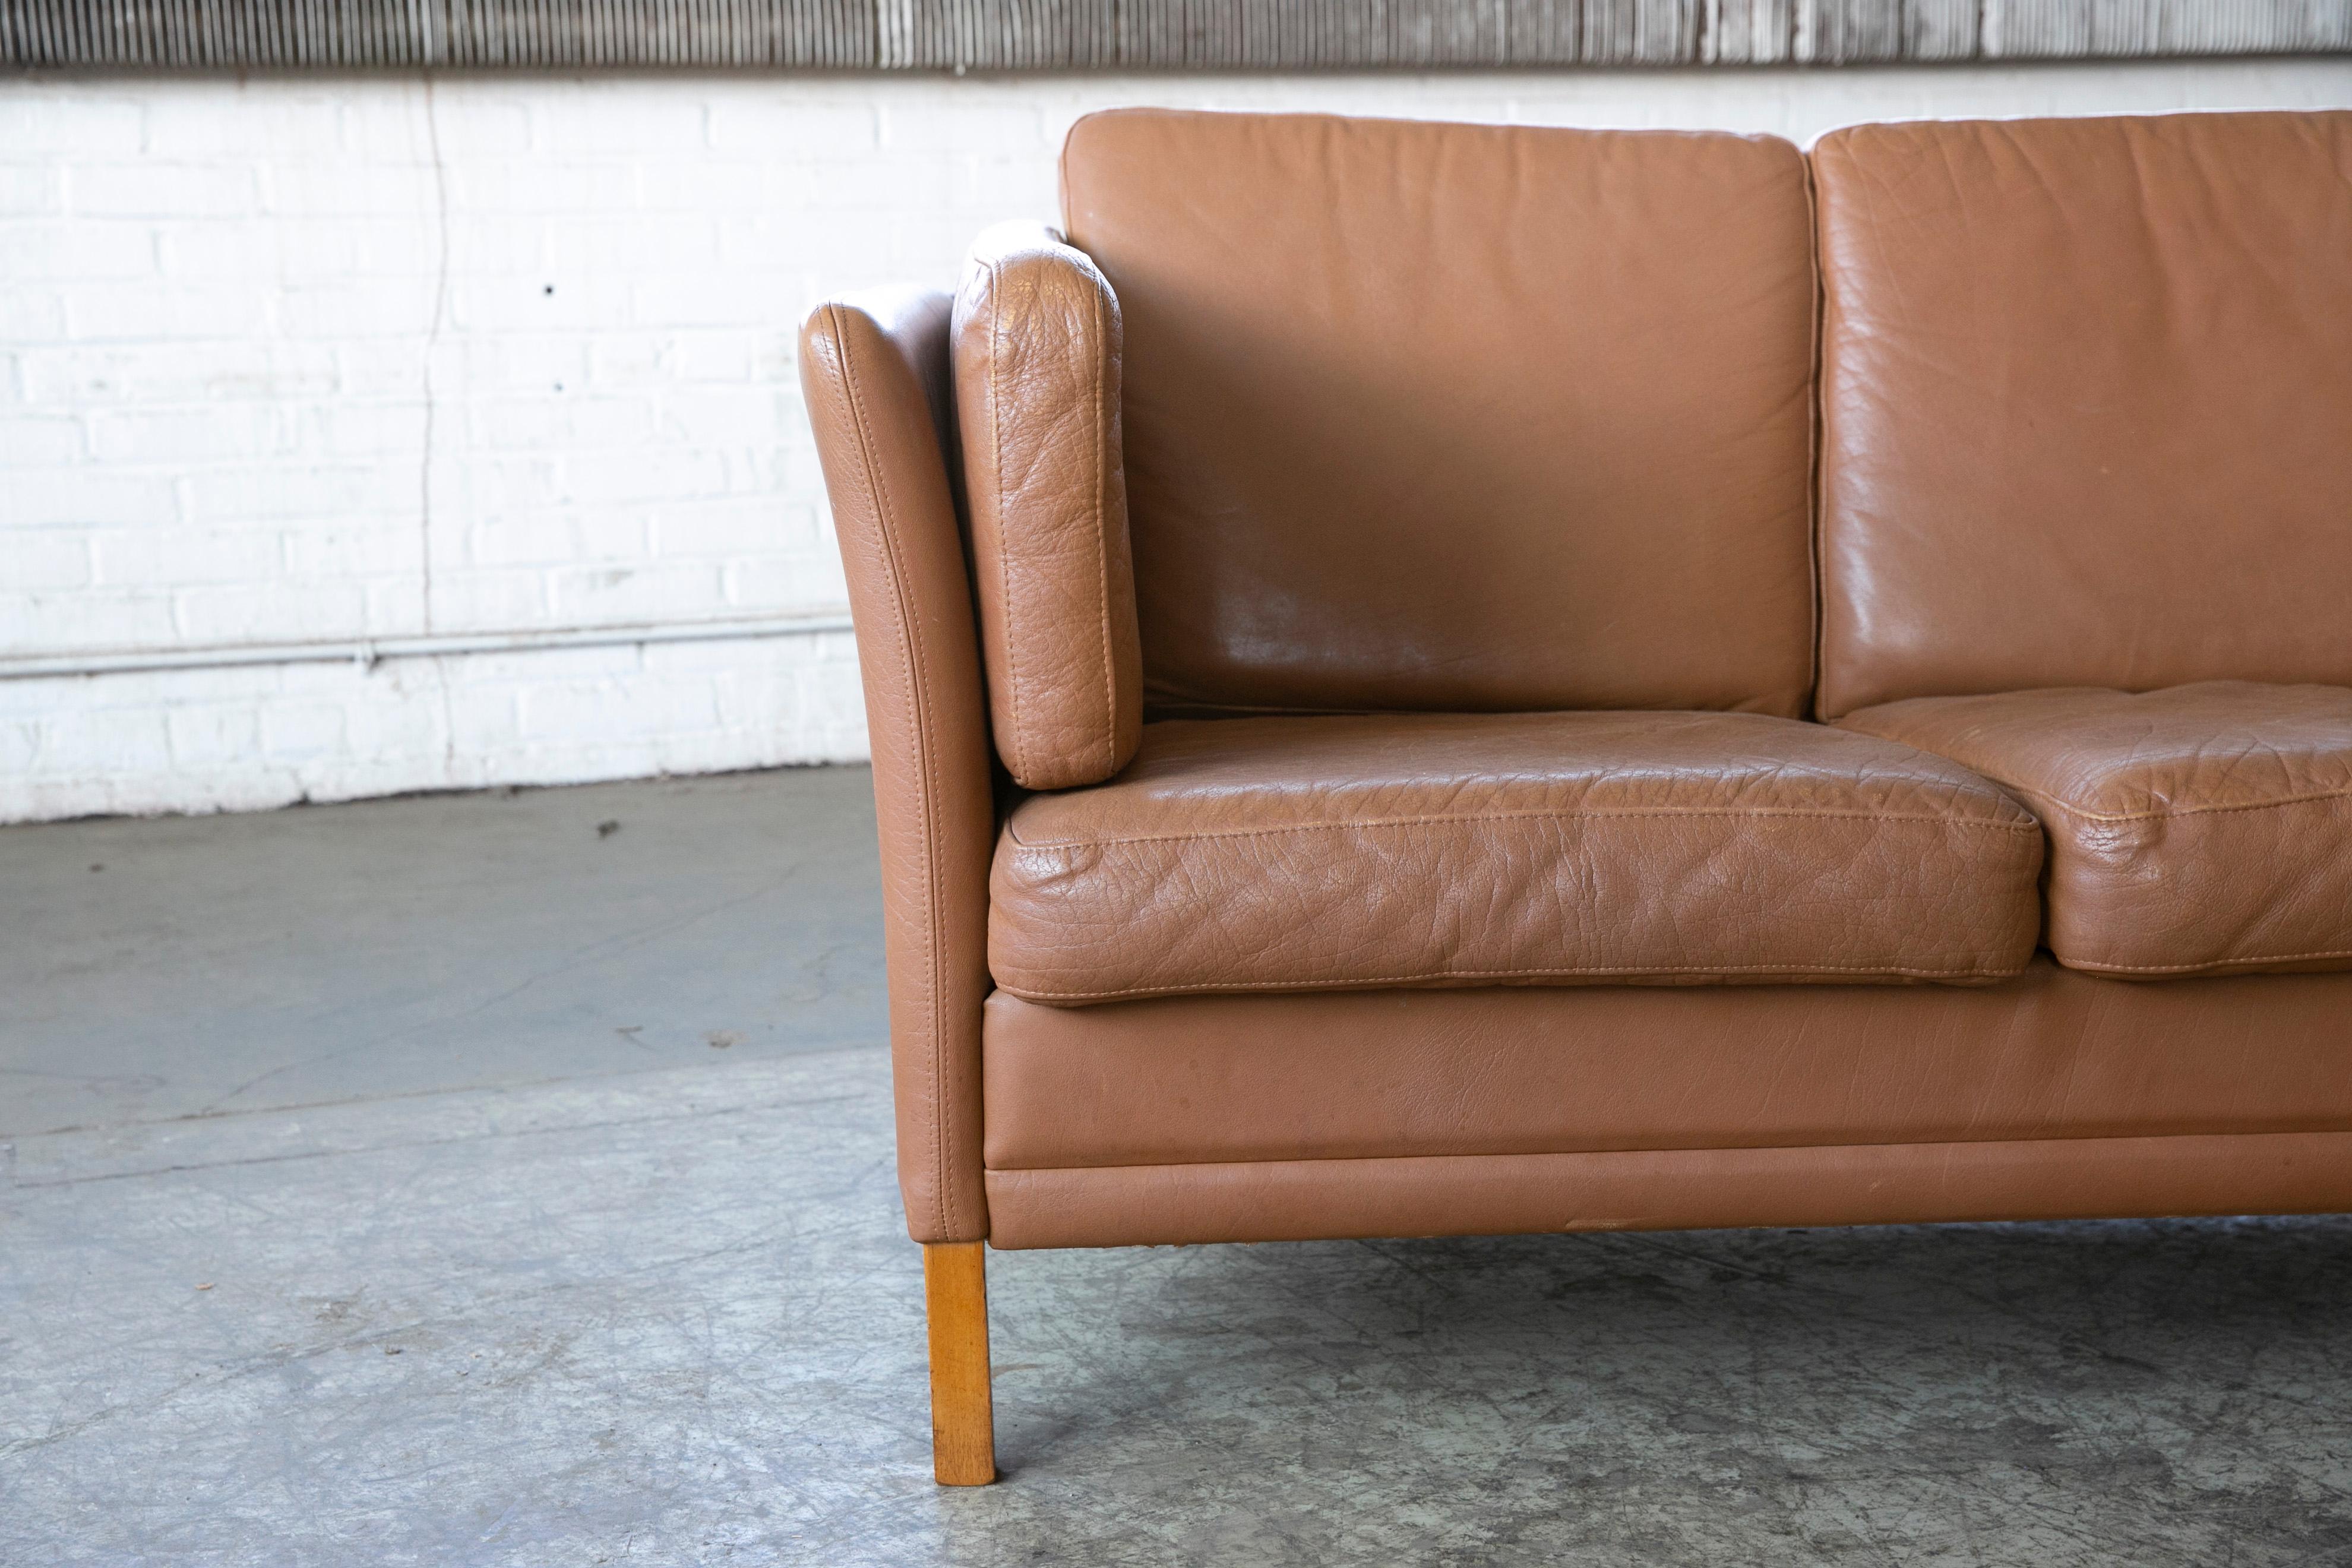 Classic Danish Midcentury Sofa in Chestnut Colored Leather by Mogens Hansen 1